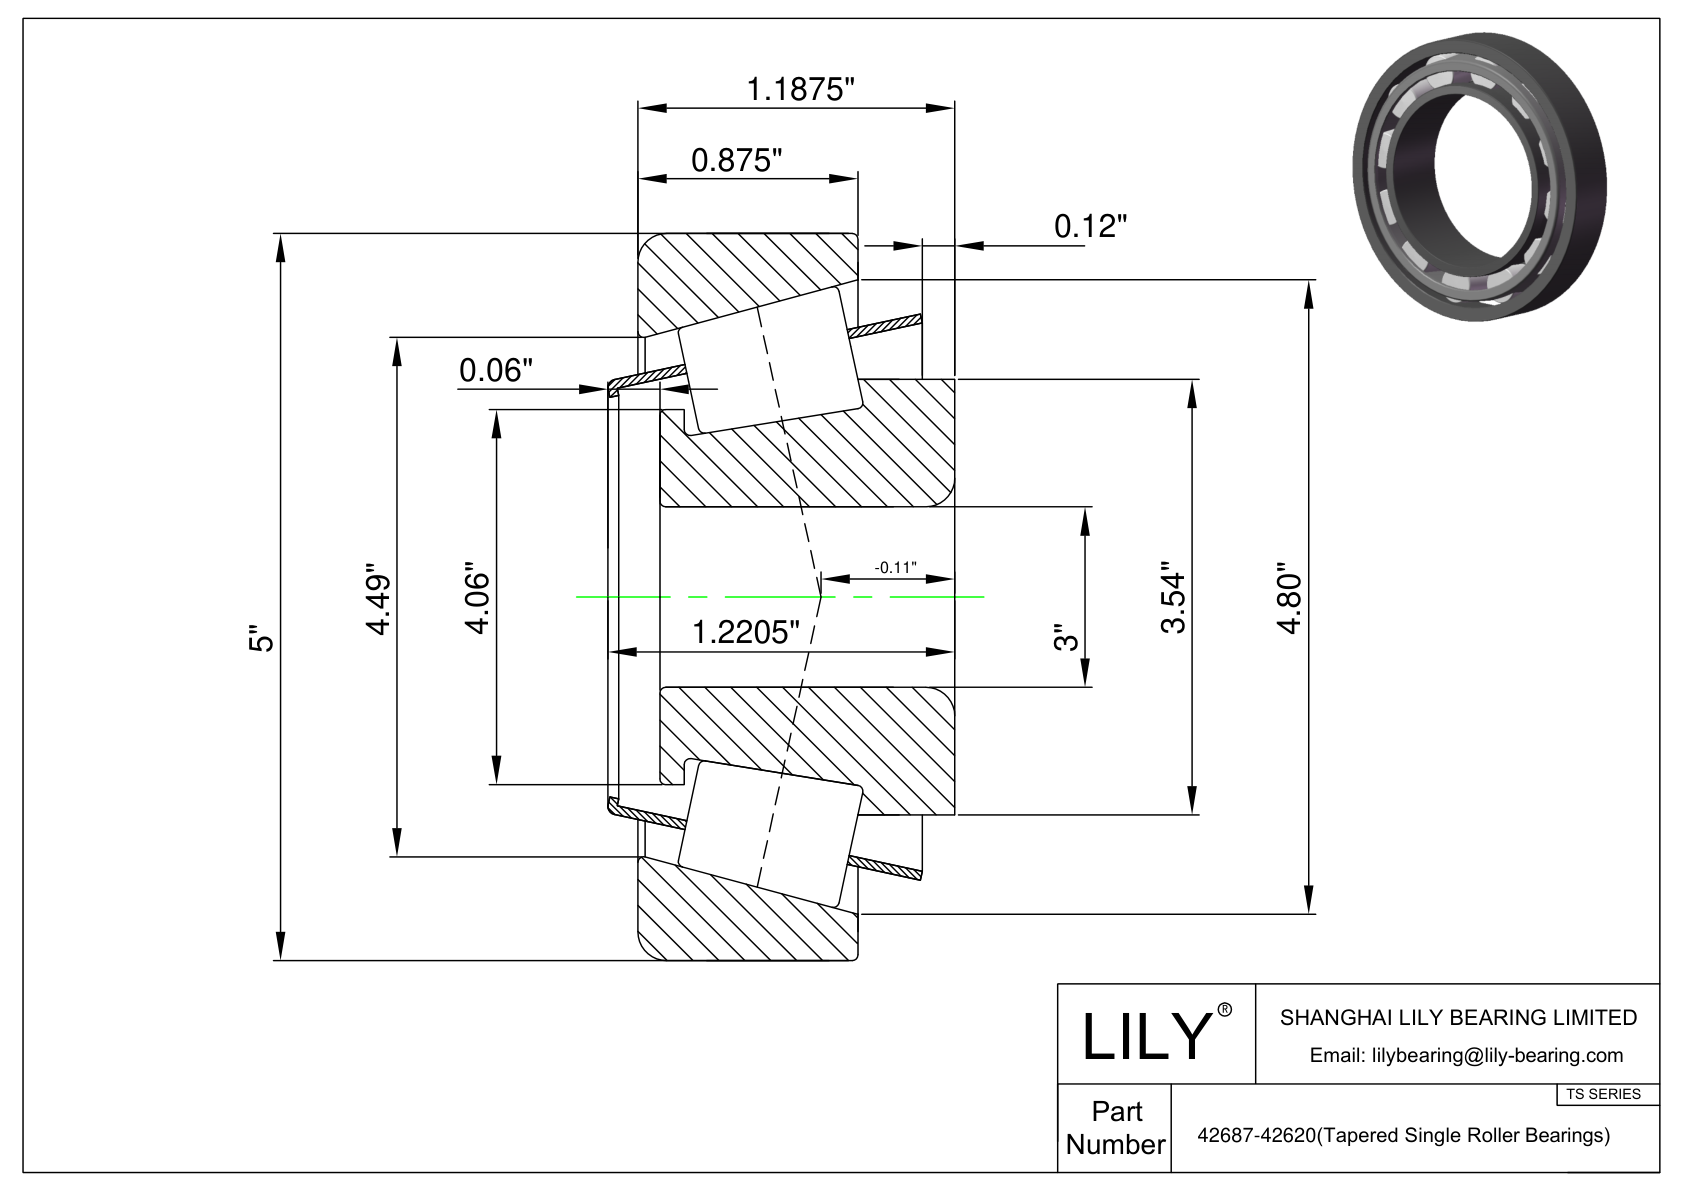 42687-42620 TS (Tapered Single Roller Bearings) (Imperial) cad drawing